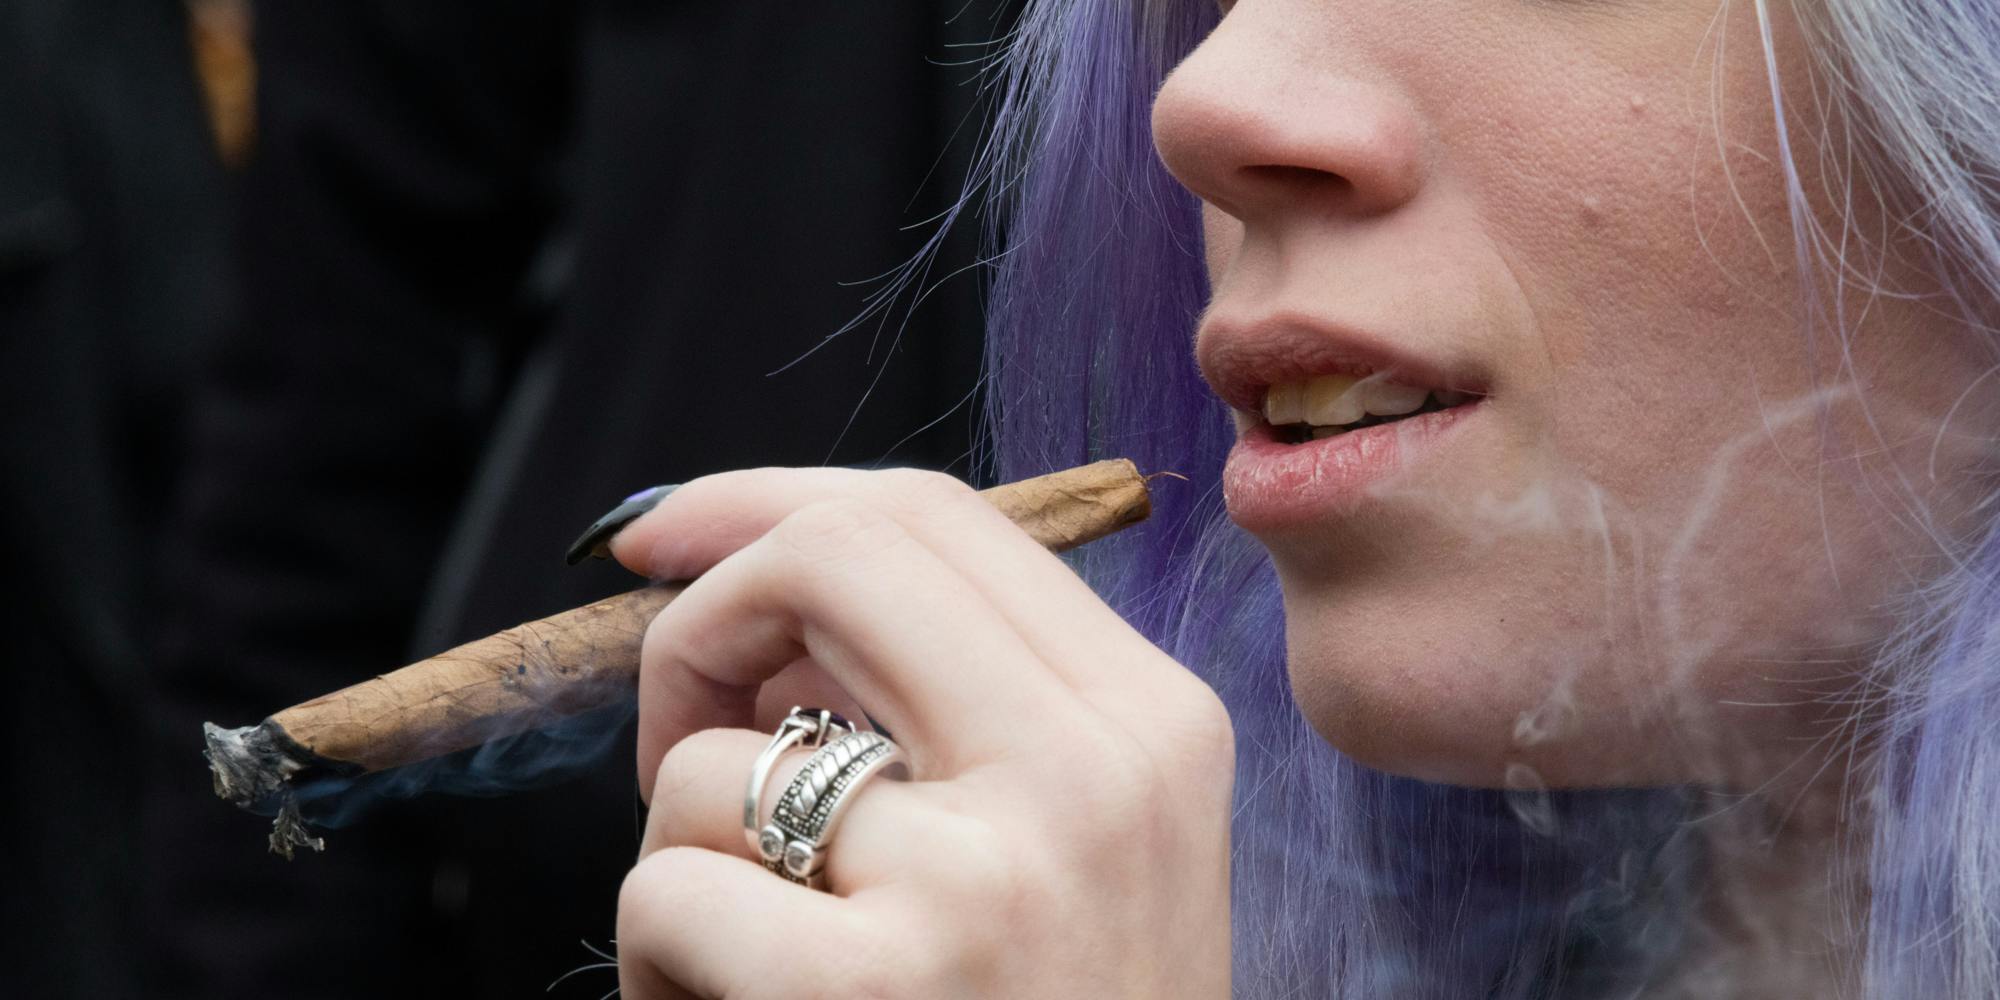 woman smokes cannabis during the annual NYC Cannabis Parade. Turns out women smoke more than men